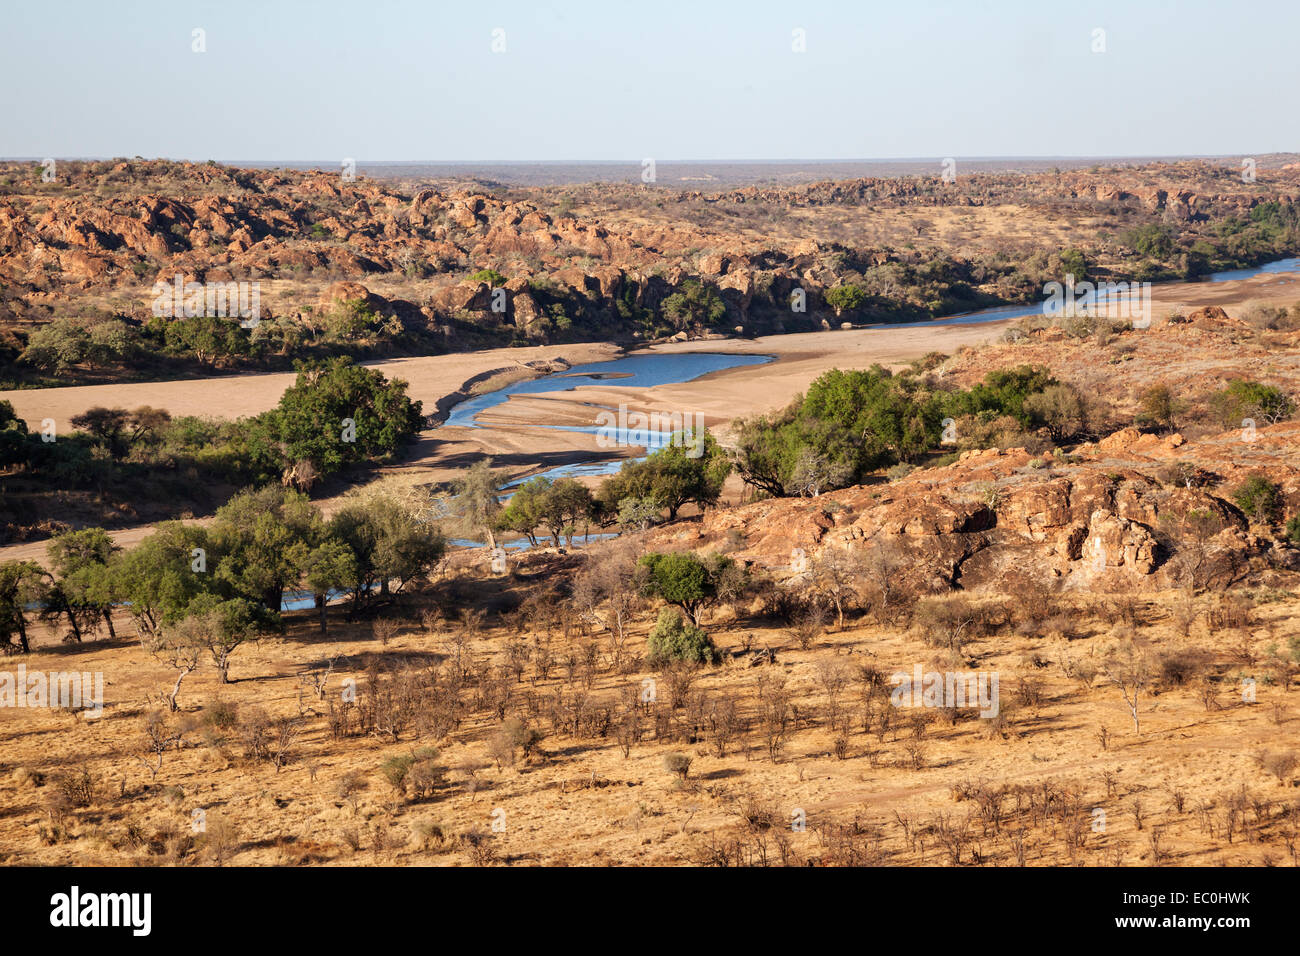 Mapungubwe National Park, view of Limpopo and Shashi river con image